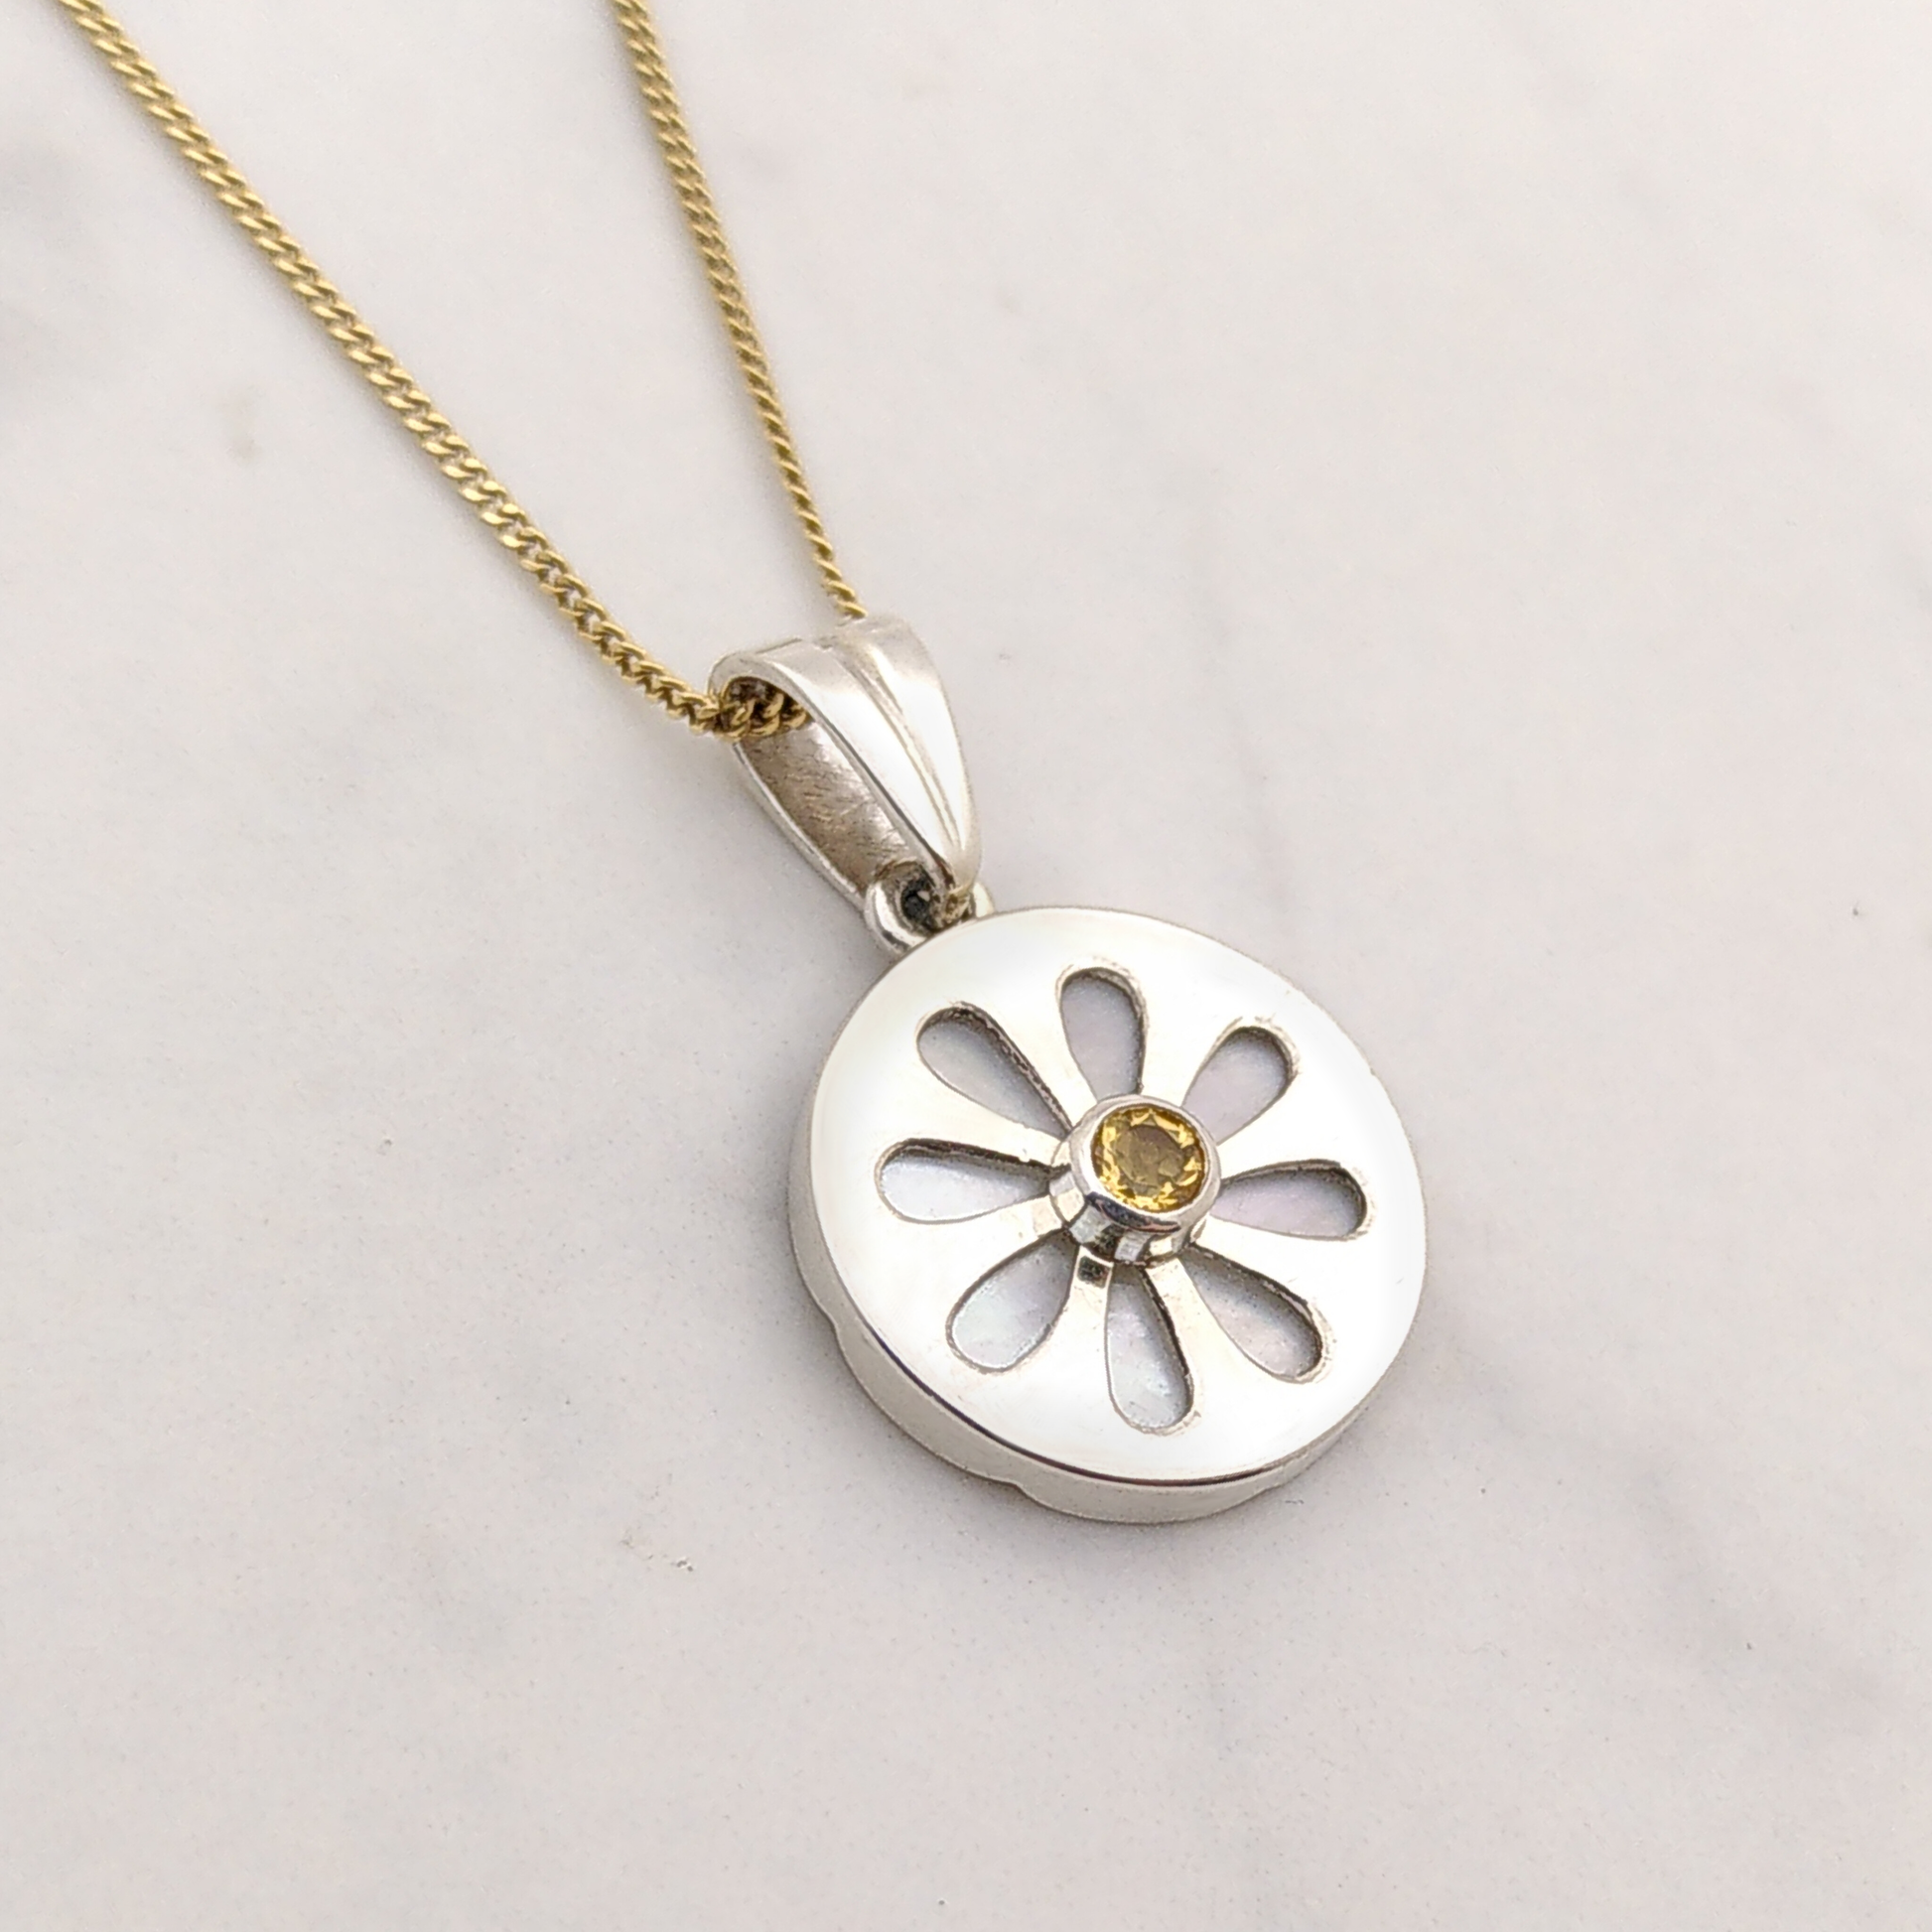 This picture is another view of the Marguerite pendant, showing the front and the side of the pendant at the same time.